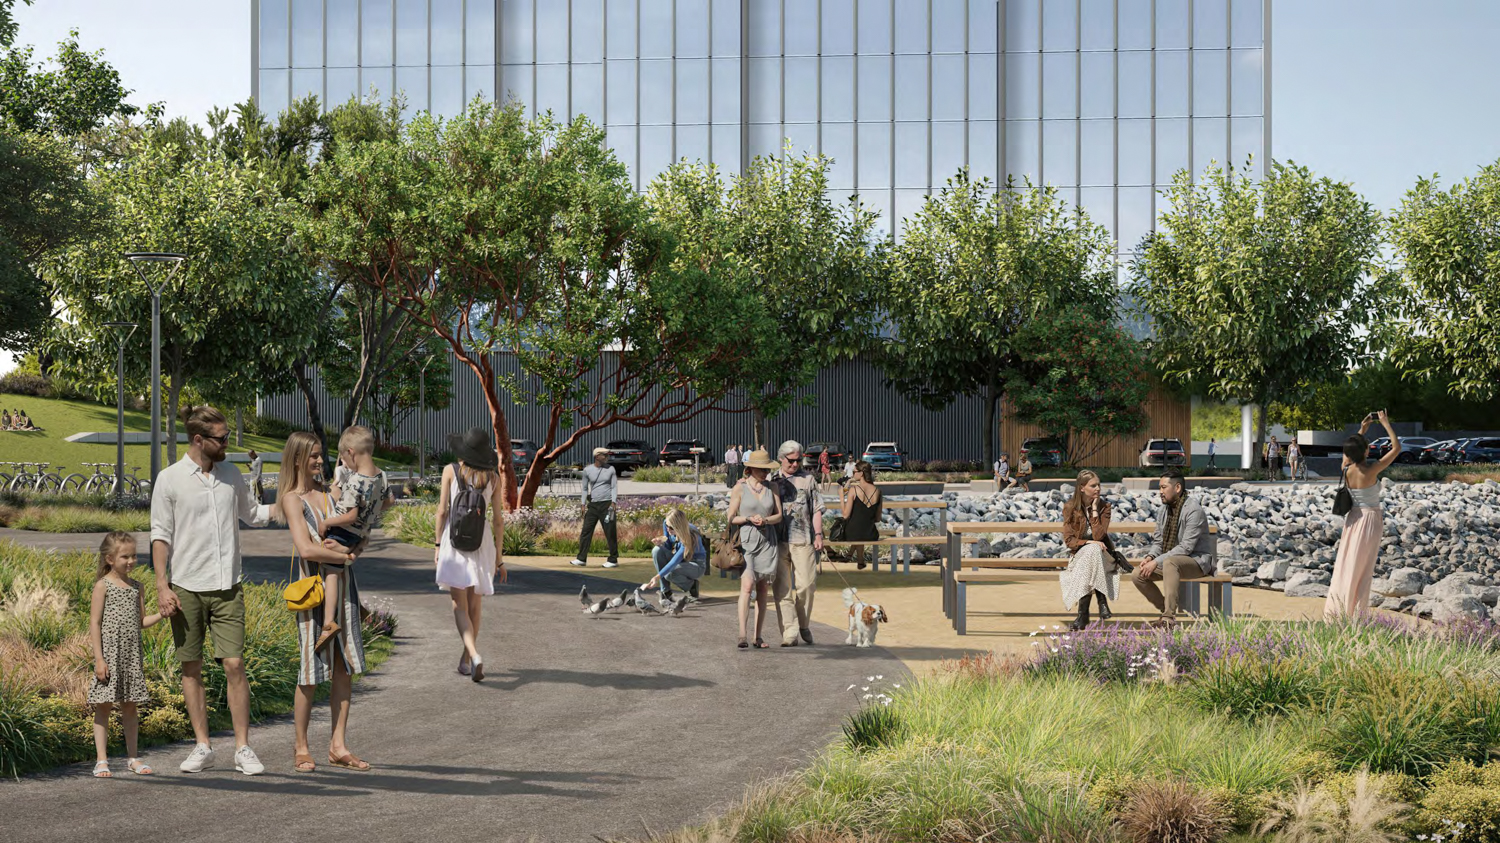 777 Airport Boulevard in the background seen from the bay trail, rendering by Gensler